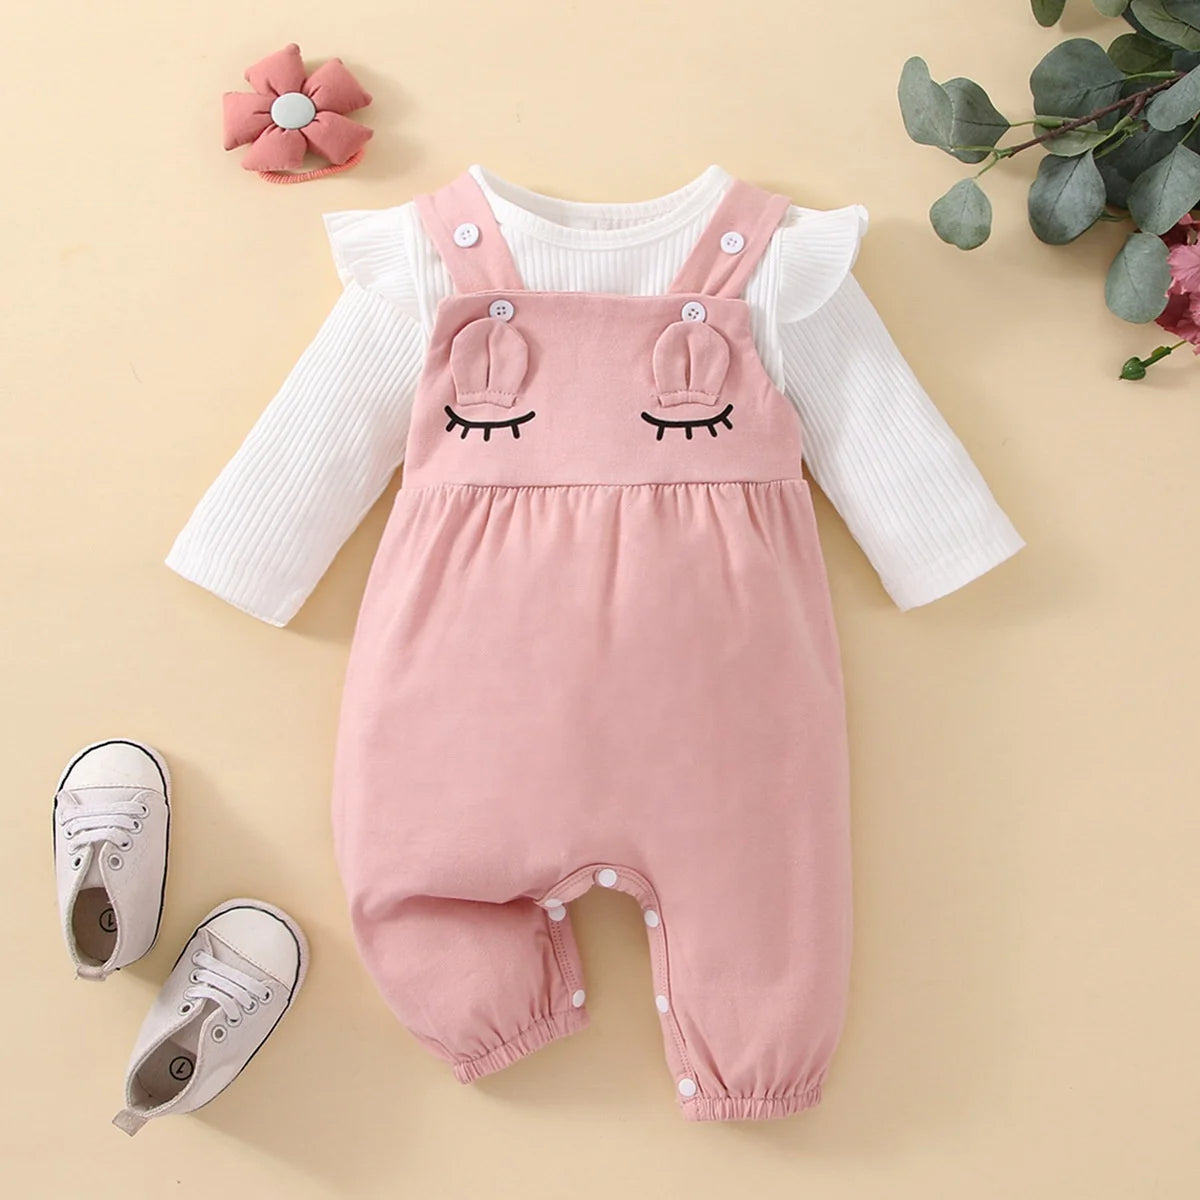 Clothes for newborn baby girl romper with long-sleeved shirt and ruffles on the shoulder set 2 pieces